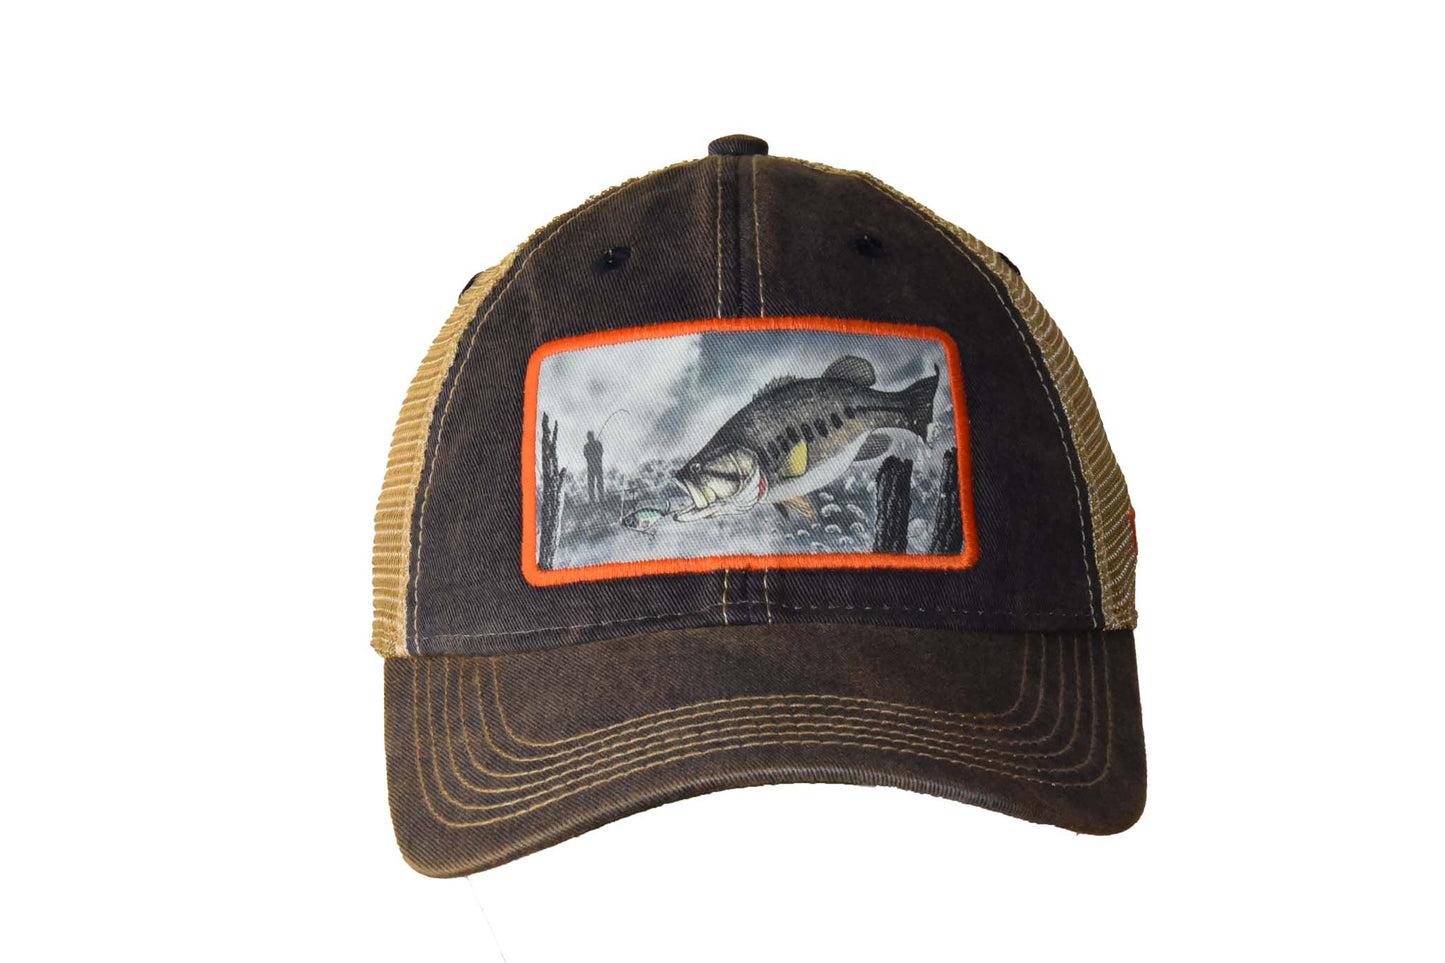 Large Mouth Bass – Navy Trucker